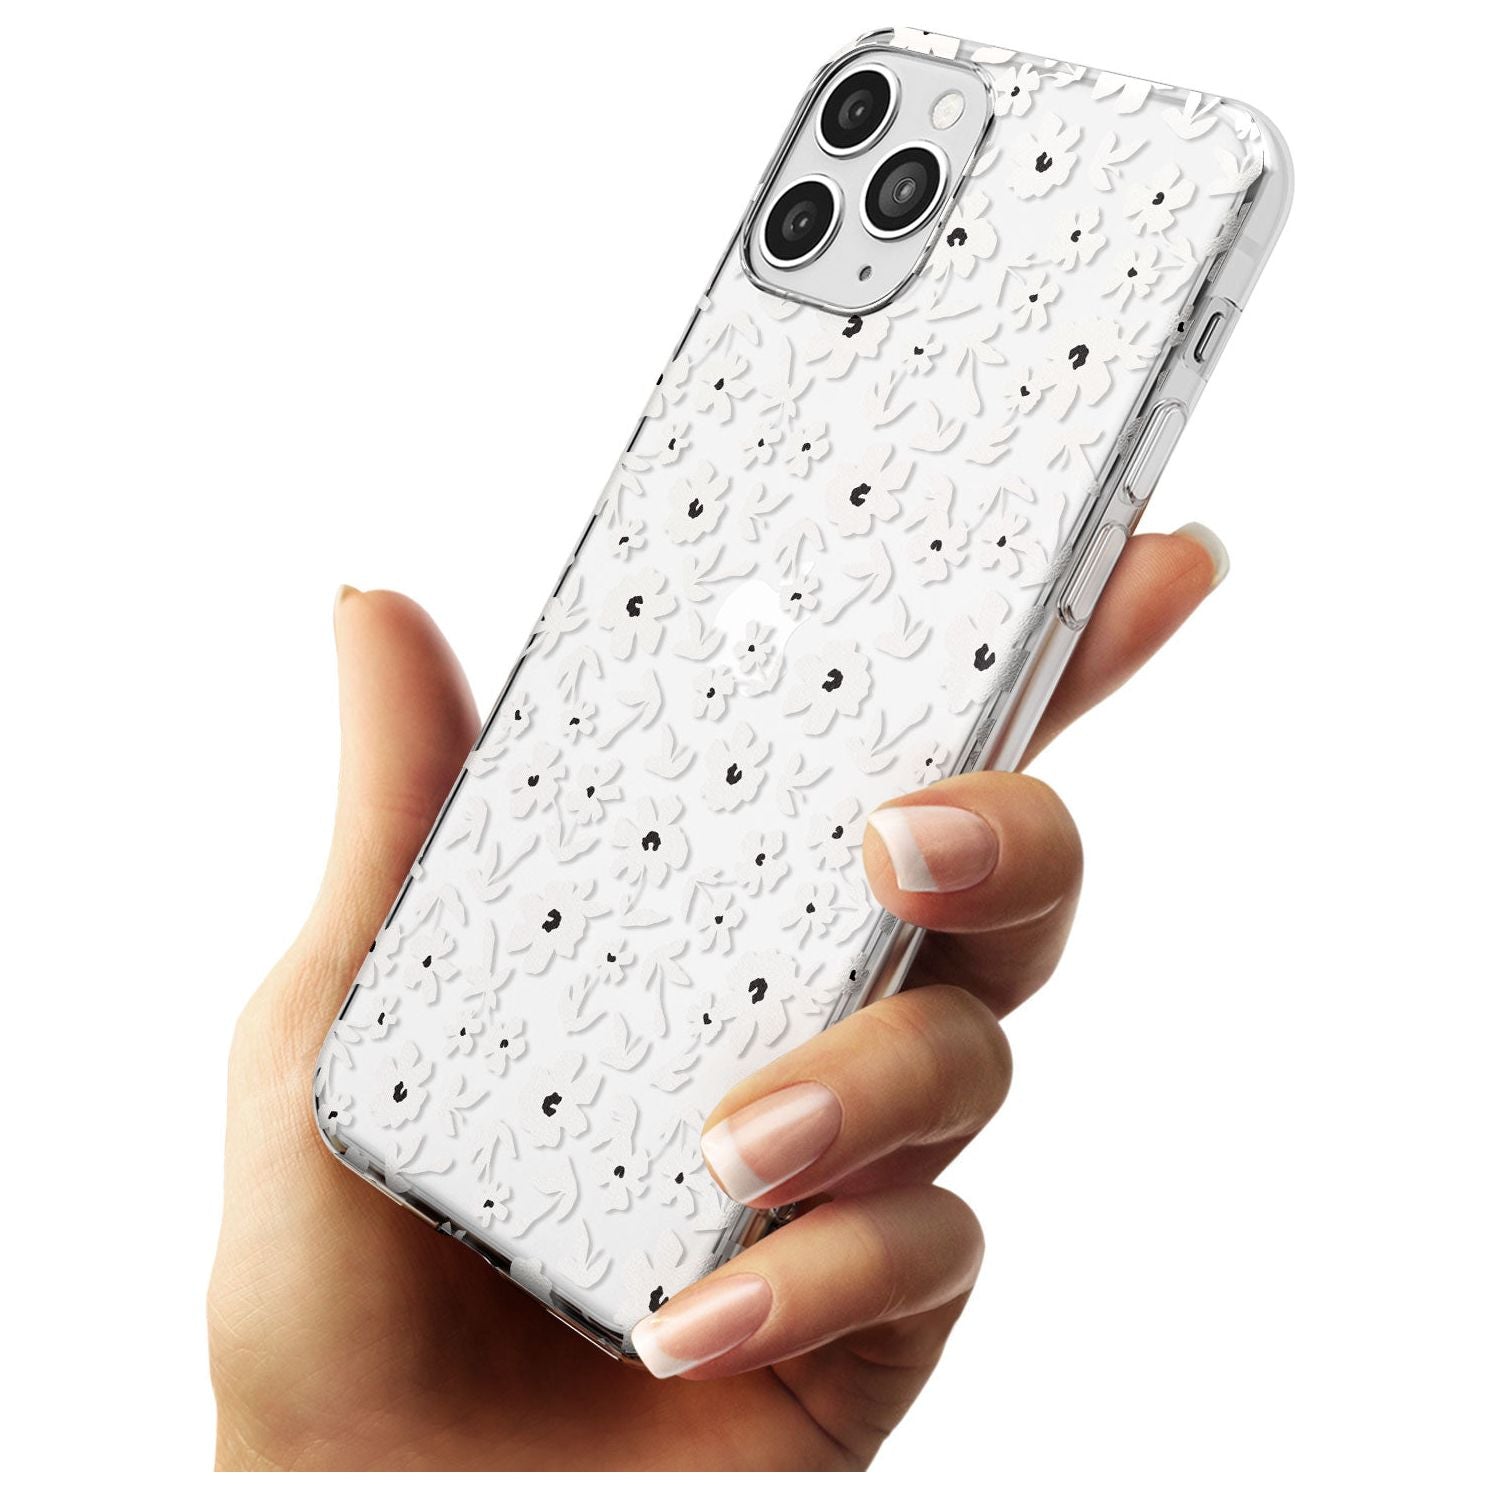 Floral Print on Clear - Cute Floral Design Black Impact Phone Case for iPhone 11 Pro Max